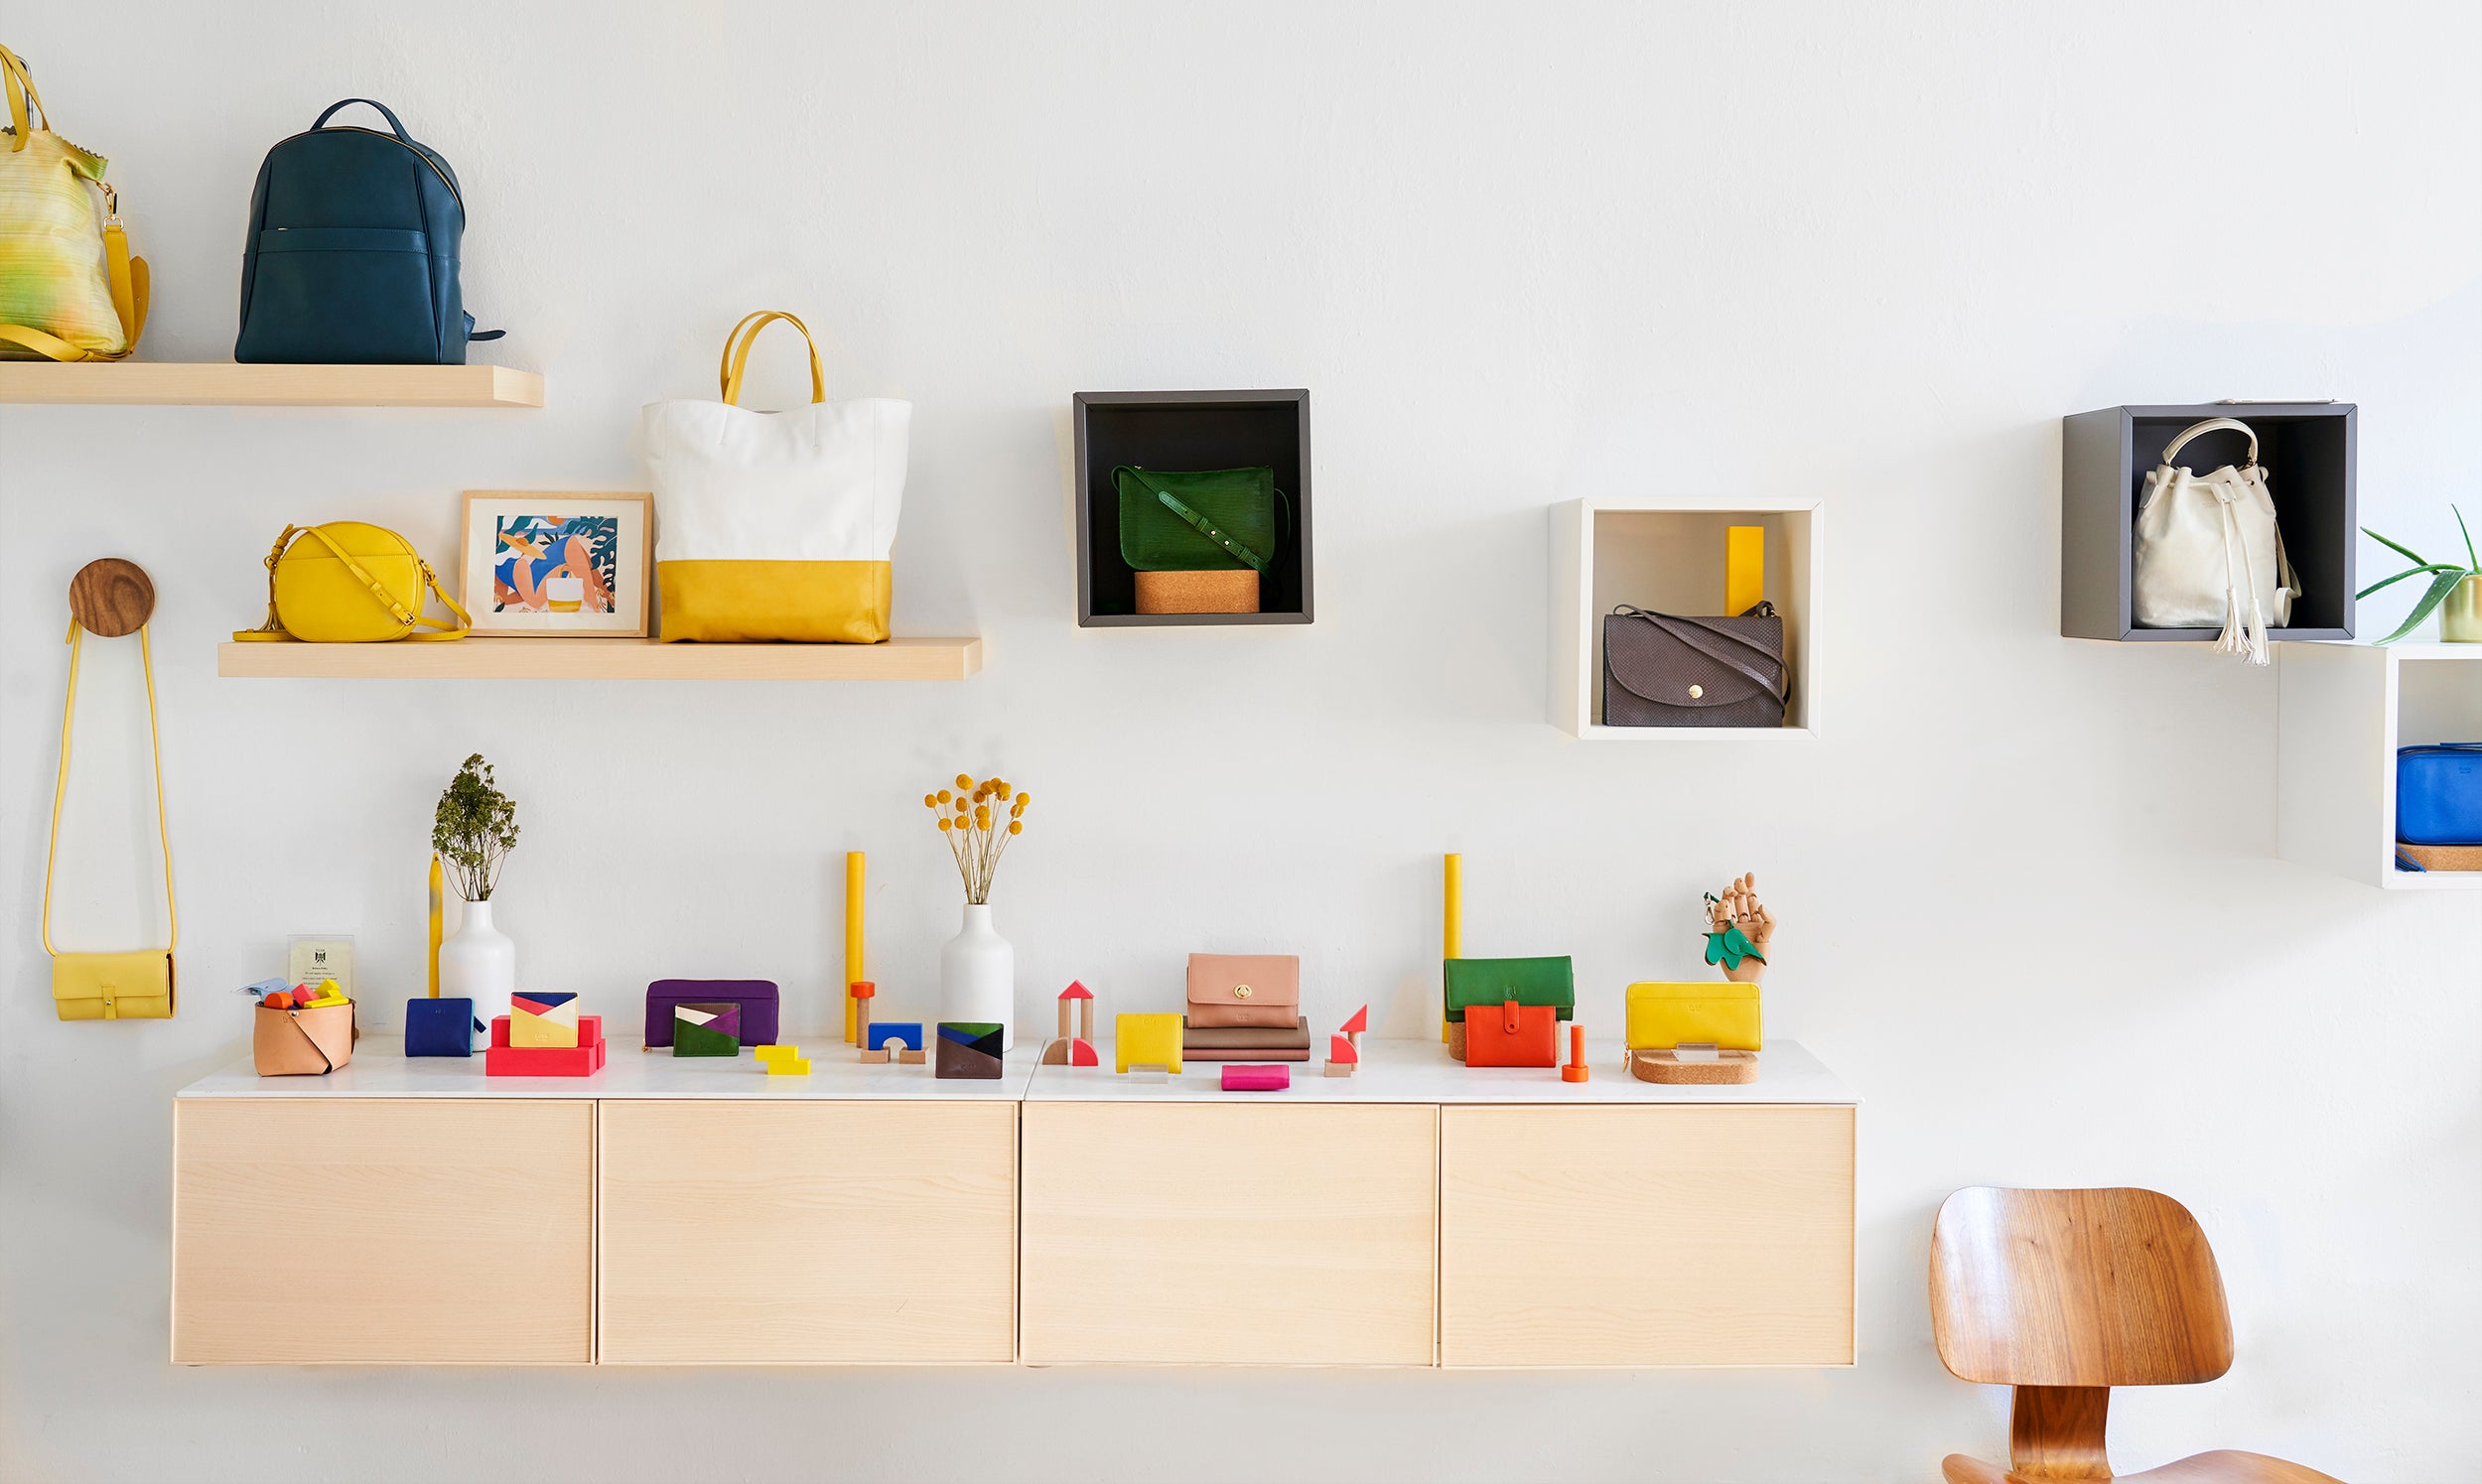 Interior wall display featuring shelves with bags, small colorful items, and wooden furniture.